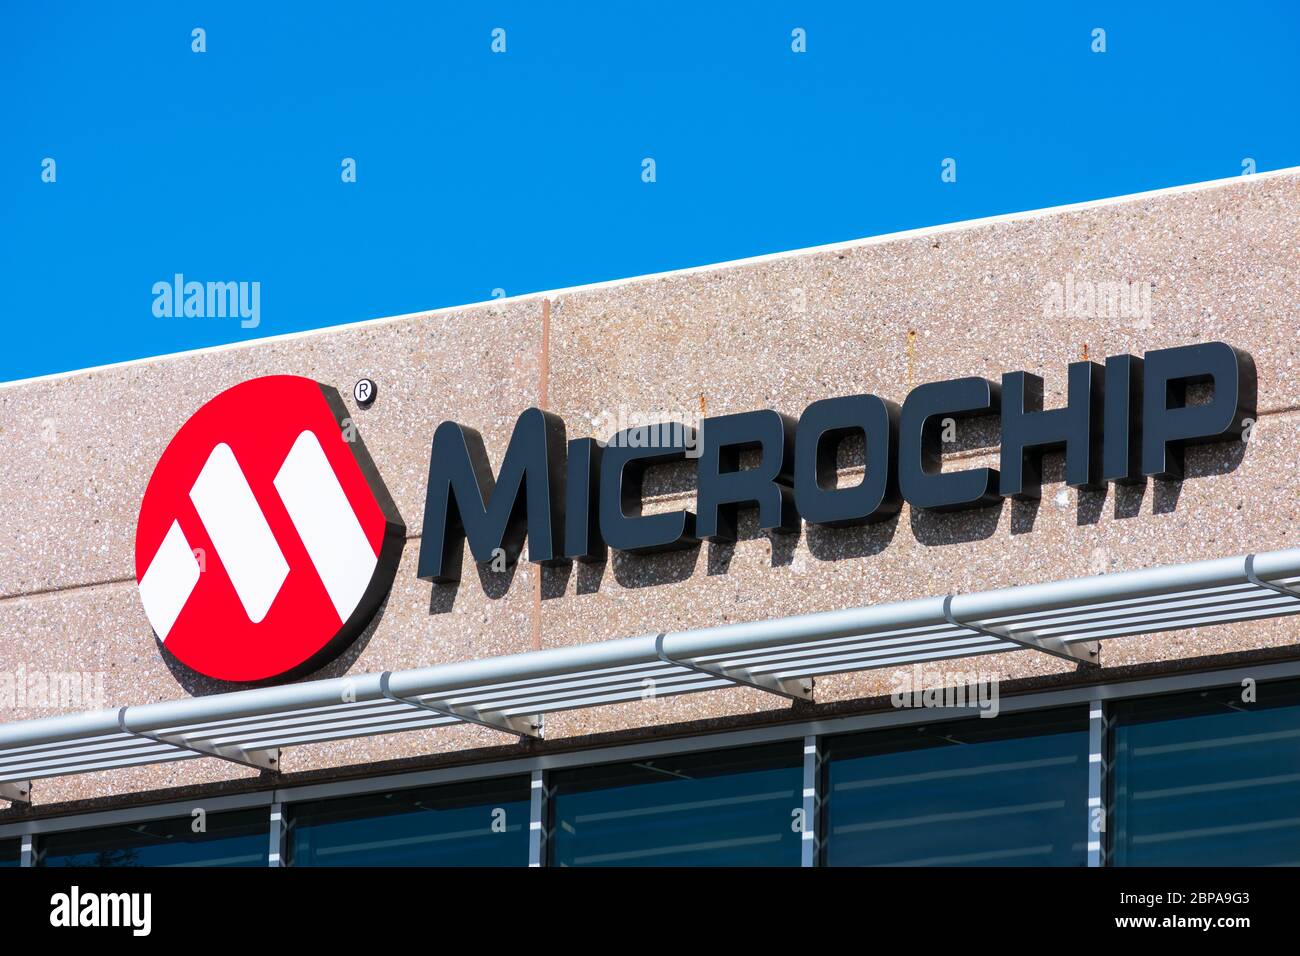 Microchip sign and logo. Microchip Technology Inc. manufactures microcontrollers, mixed-signal, analog and Flash-IP integrated circuits - San Jose, Ca Stock Photo